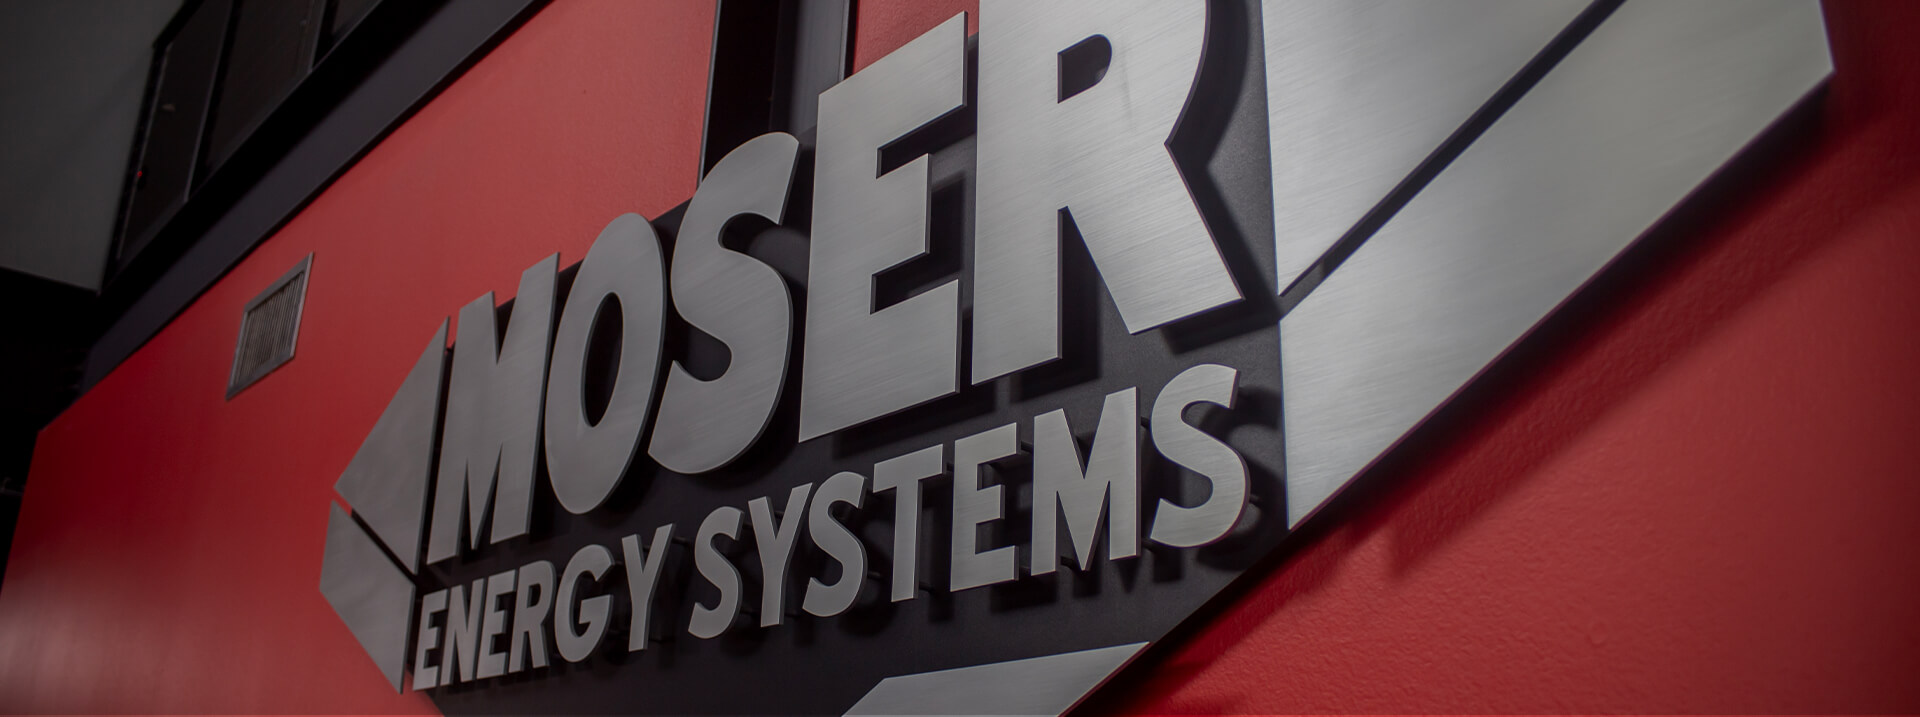 moser energy systems